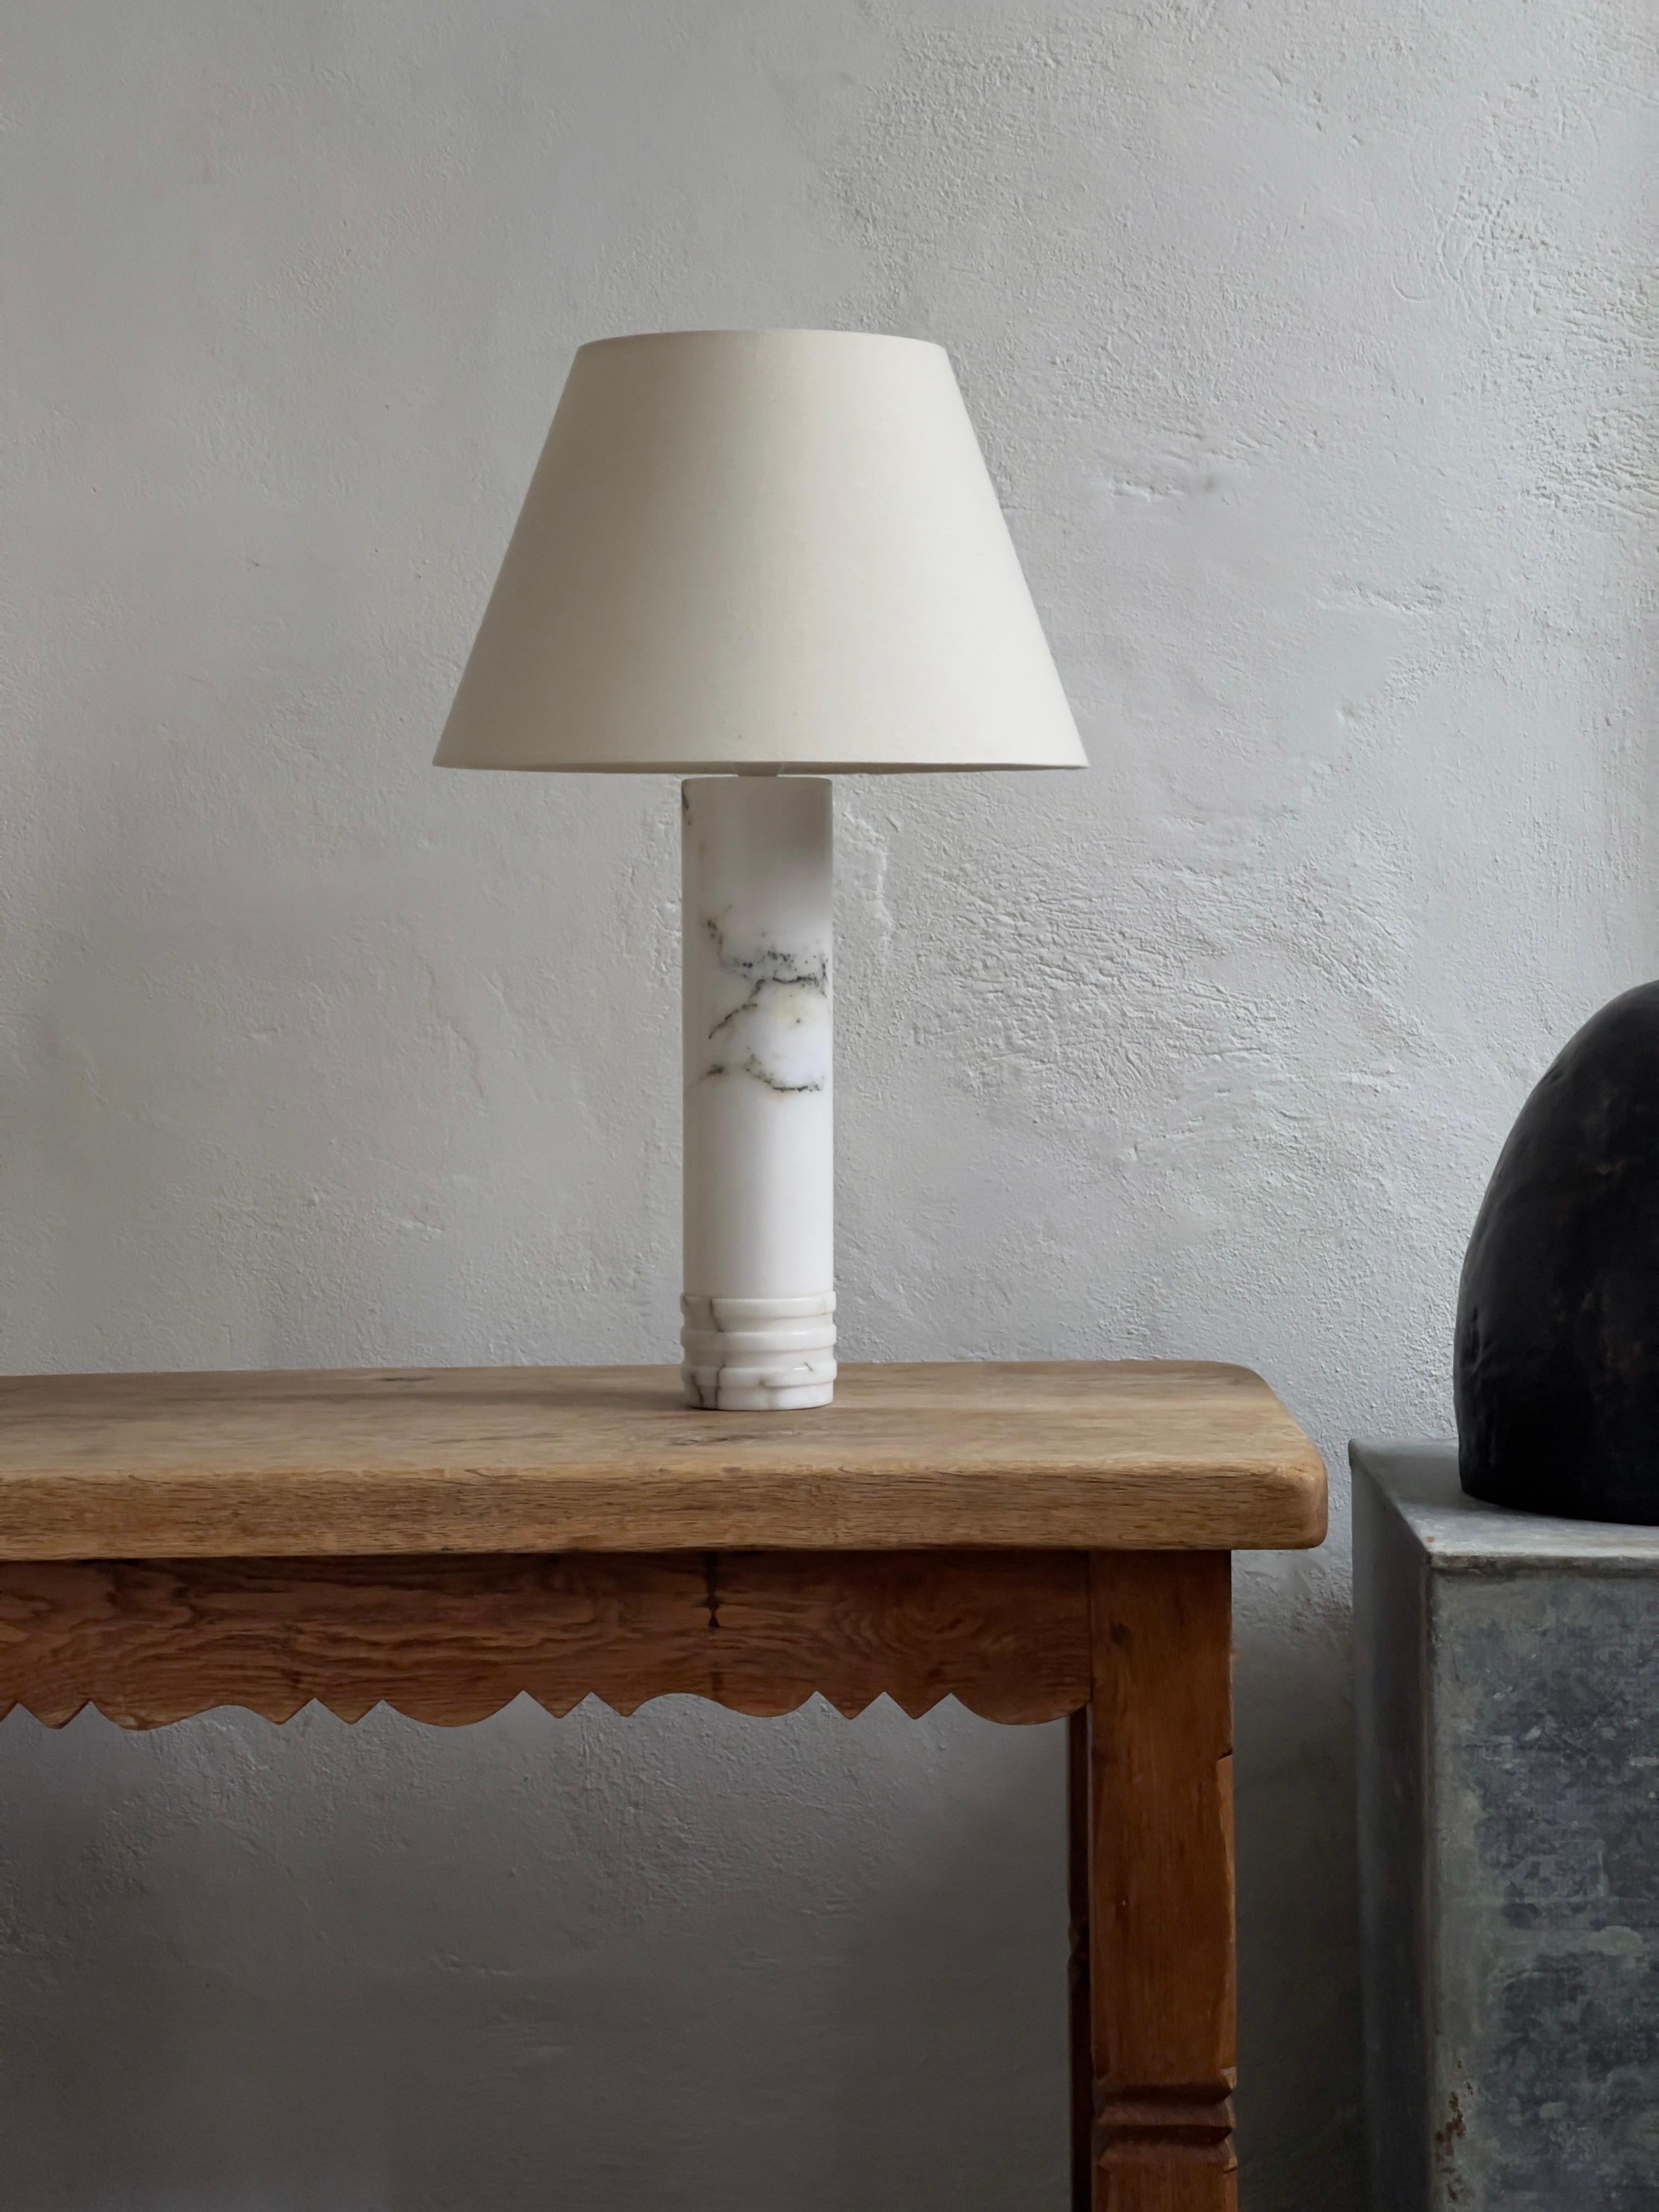 Pair of 1960s Swedish modern table lamps in solid marble and in very good condition. Manufactured by Bergboms in Sweden. Model B-10. A Single lamp also available please see listing. 
Dimension: (ex shade): diameter: 9, height: 43 cm.